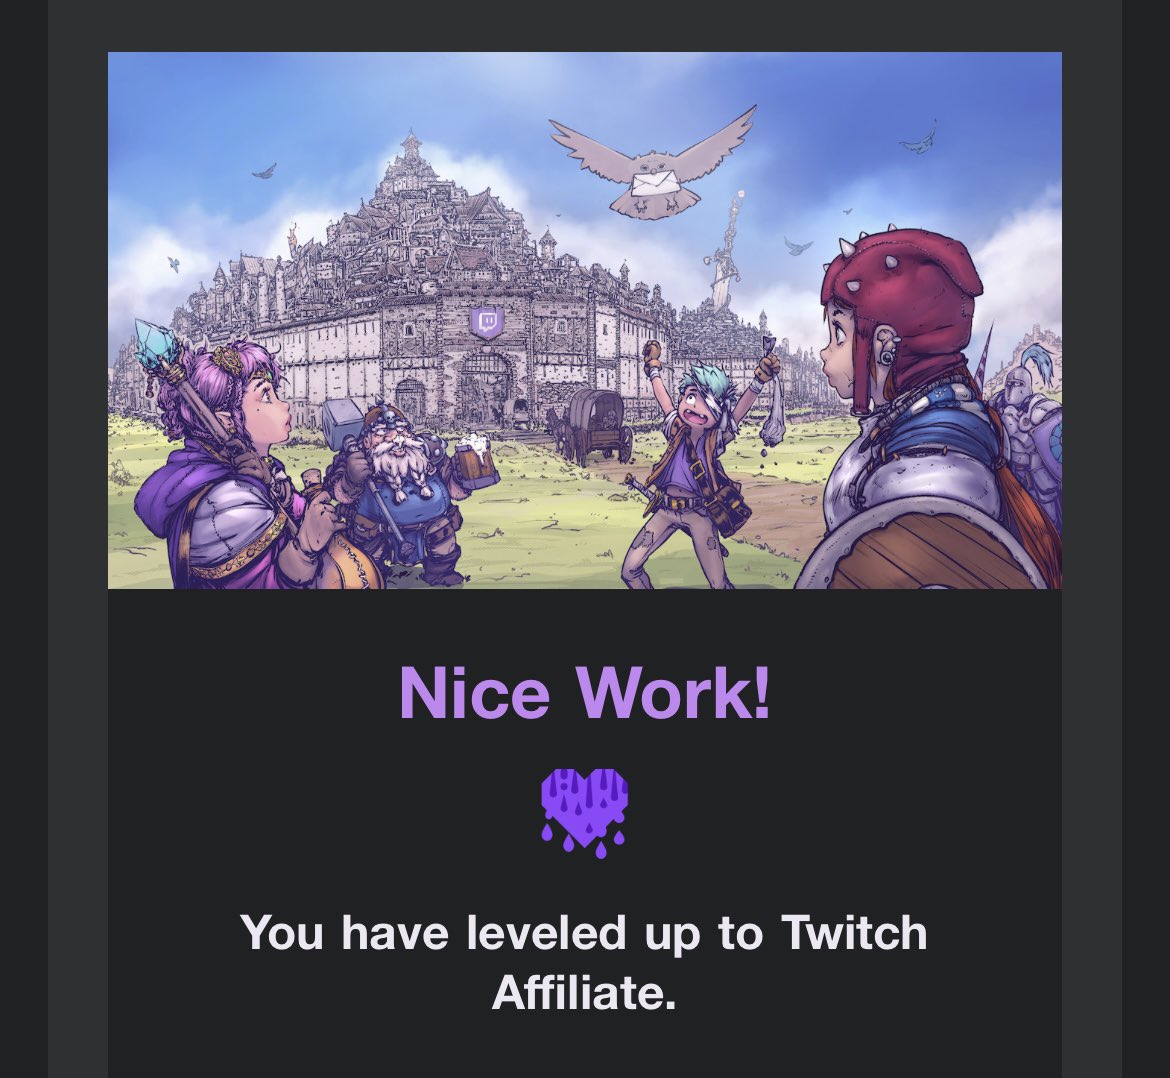 i’m officially an affiliate on twitch! thank you so much to everyone who got me here! this is just the beginning on to something amazing! the journey starts now! #TwitchAffiliate #TwitchStreamer #SupportSmallStreamers #Grateful